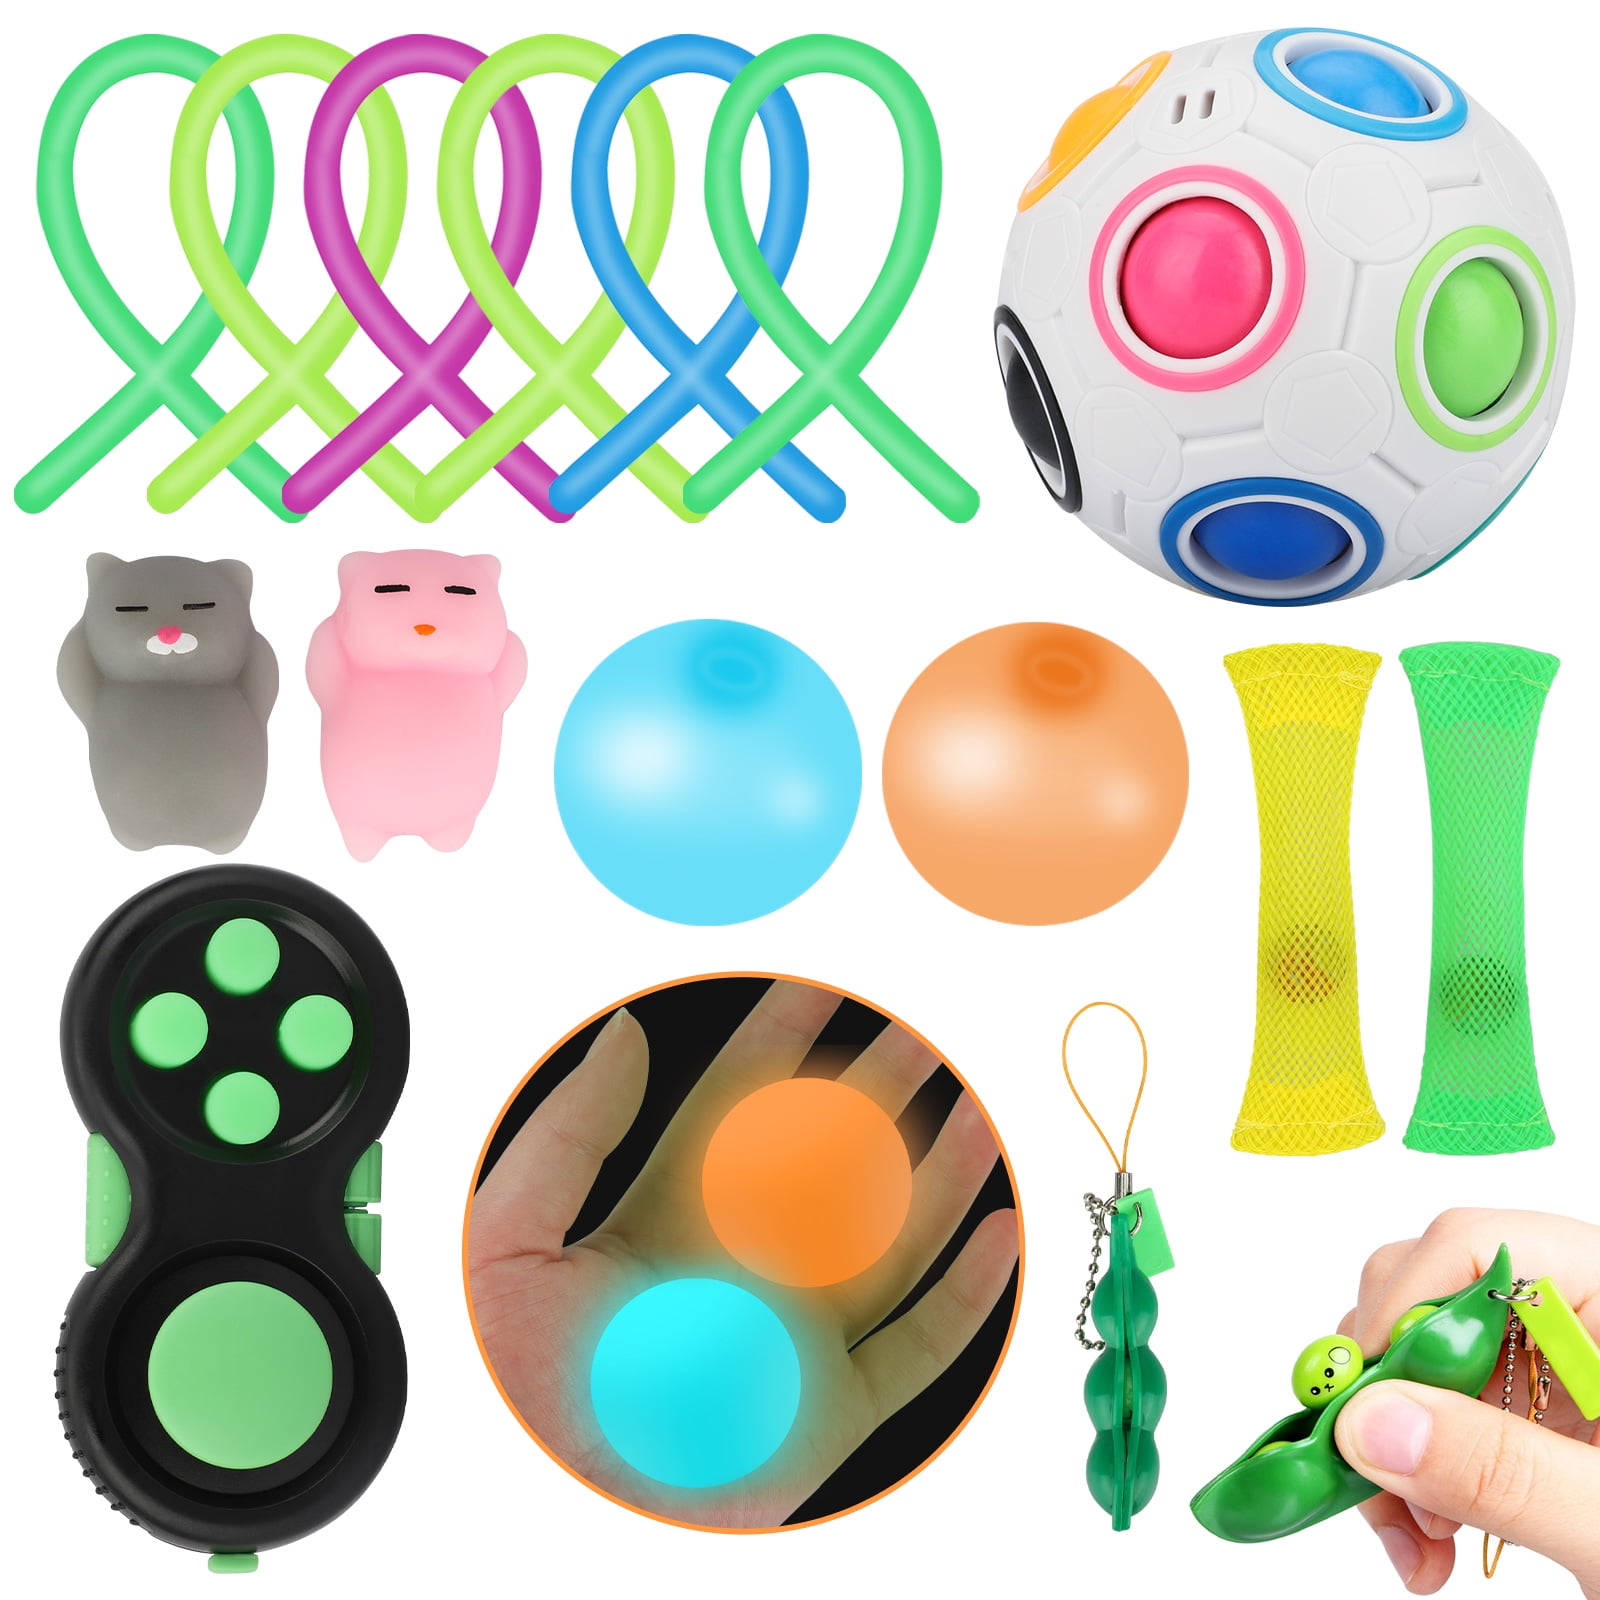 Sensory Fidget Toys Set Stress Relief Anti-anxiety Tools for Kids S 25 Pcs for sale online 